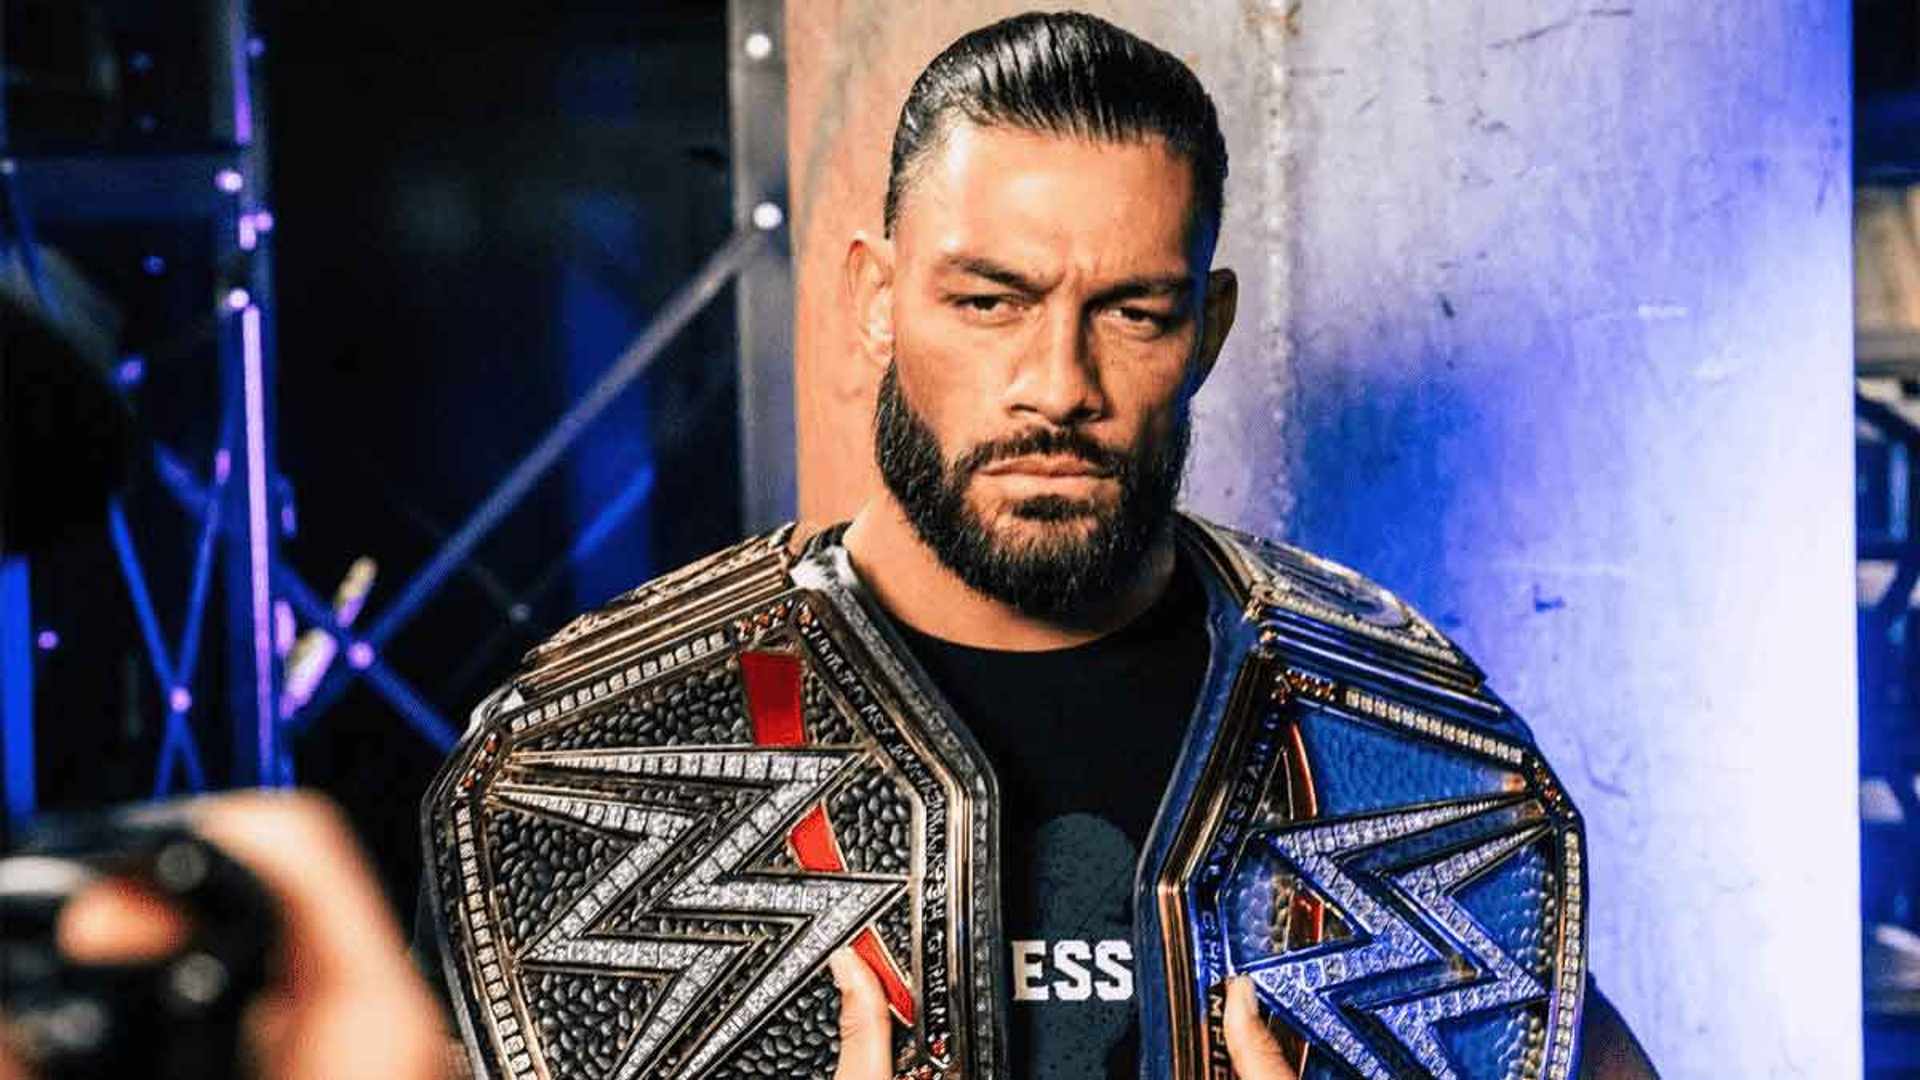 “The Tribal Chief” Roman Reigns Reaches A Rare Milestone As Undisputed